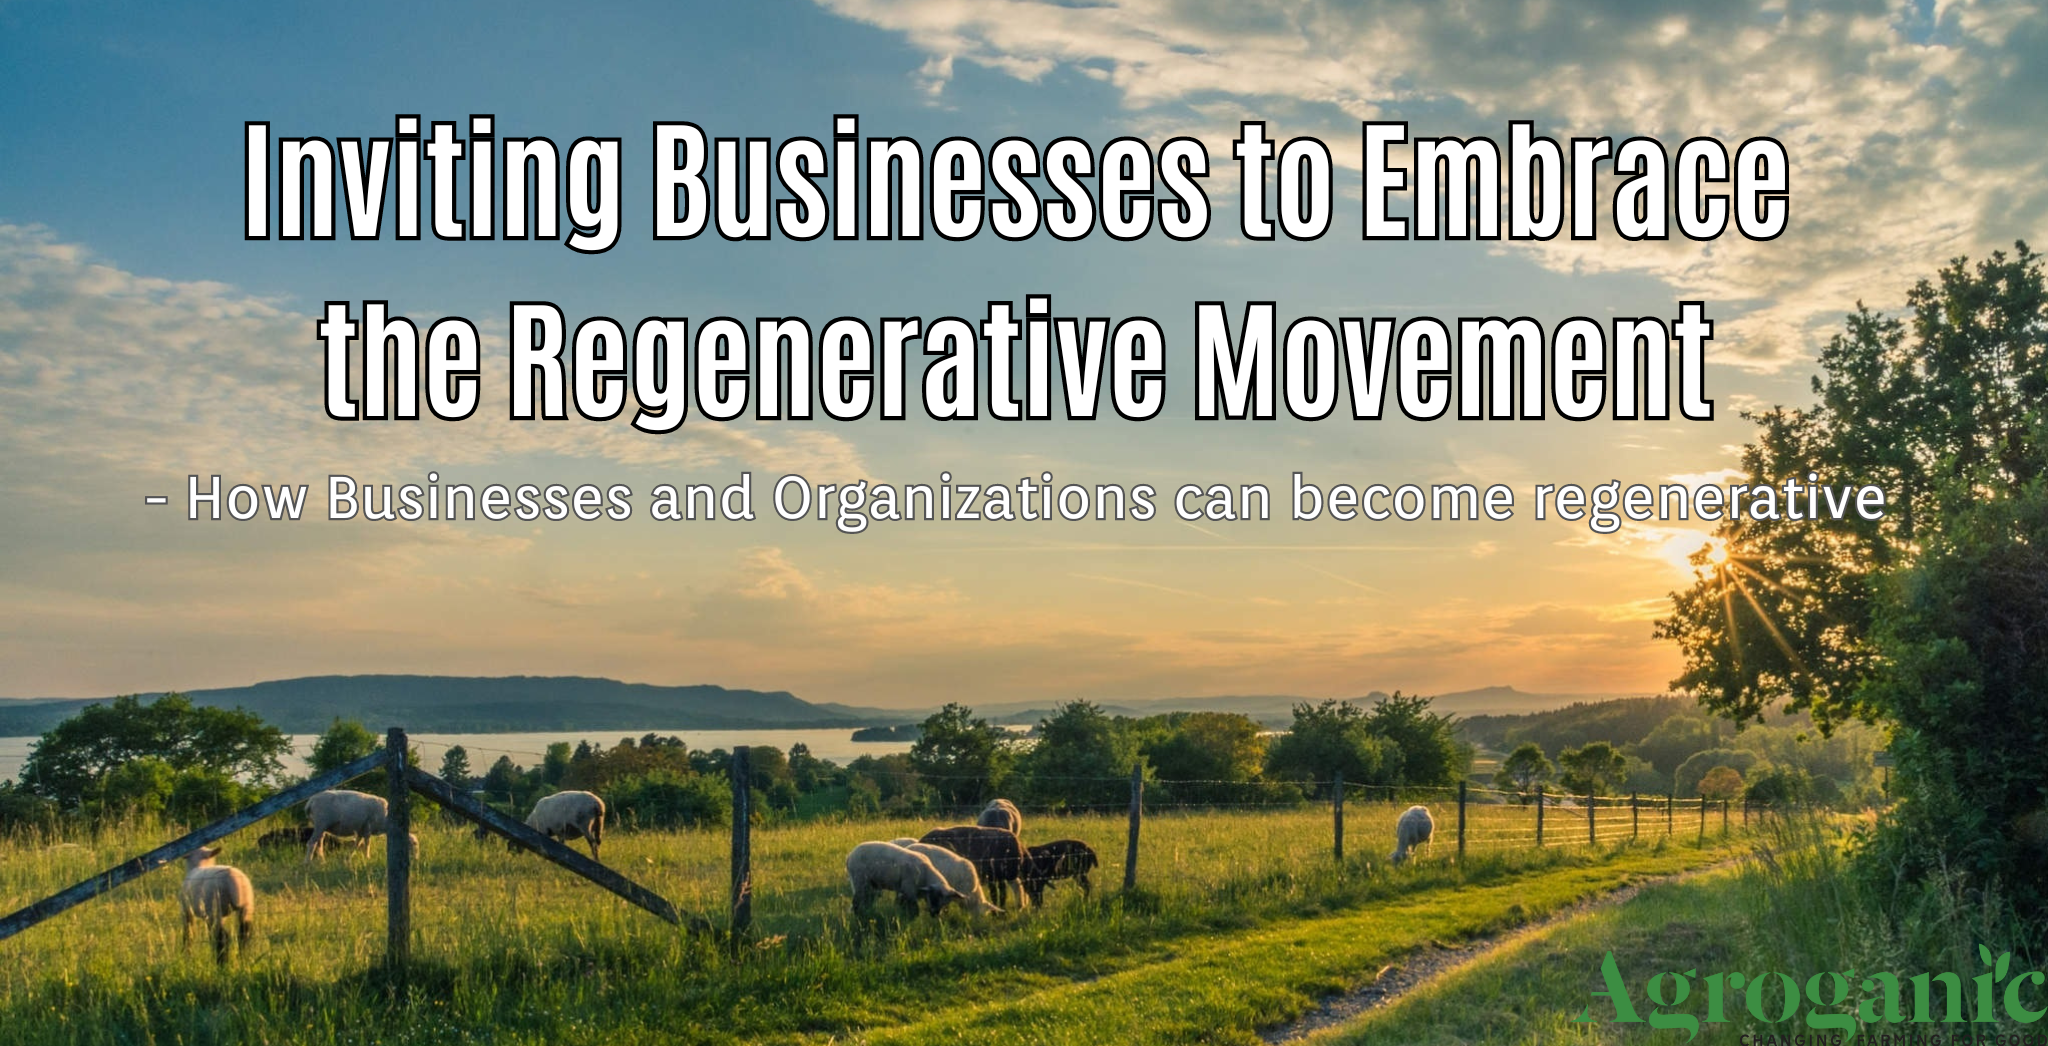 How to become regenerative